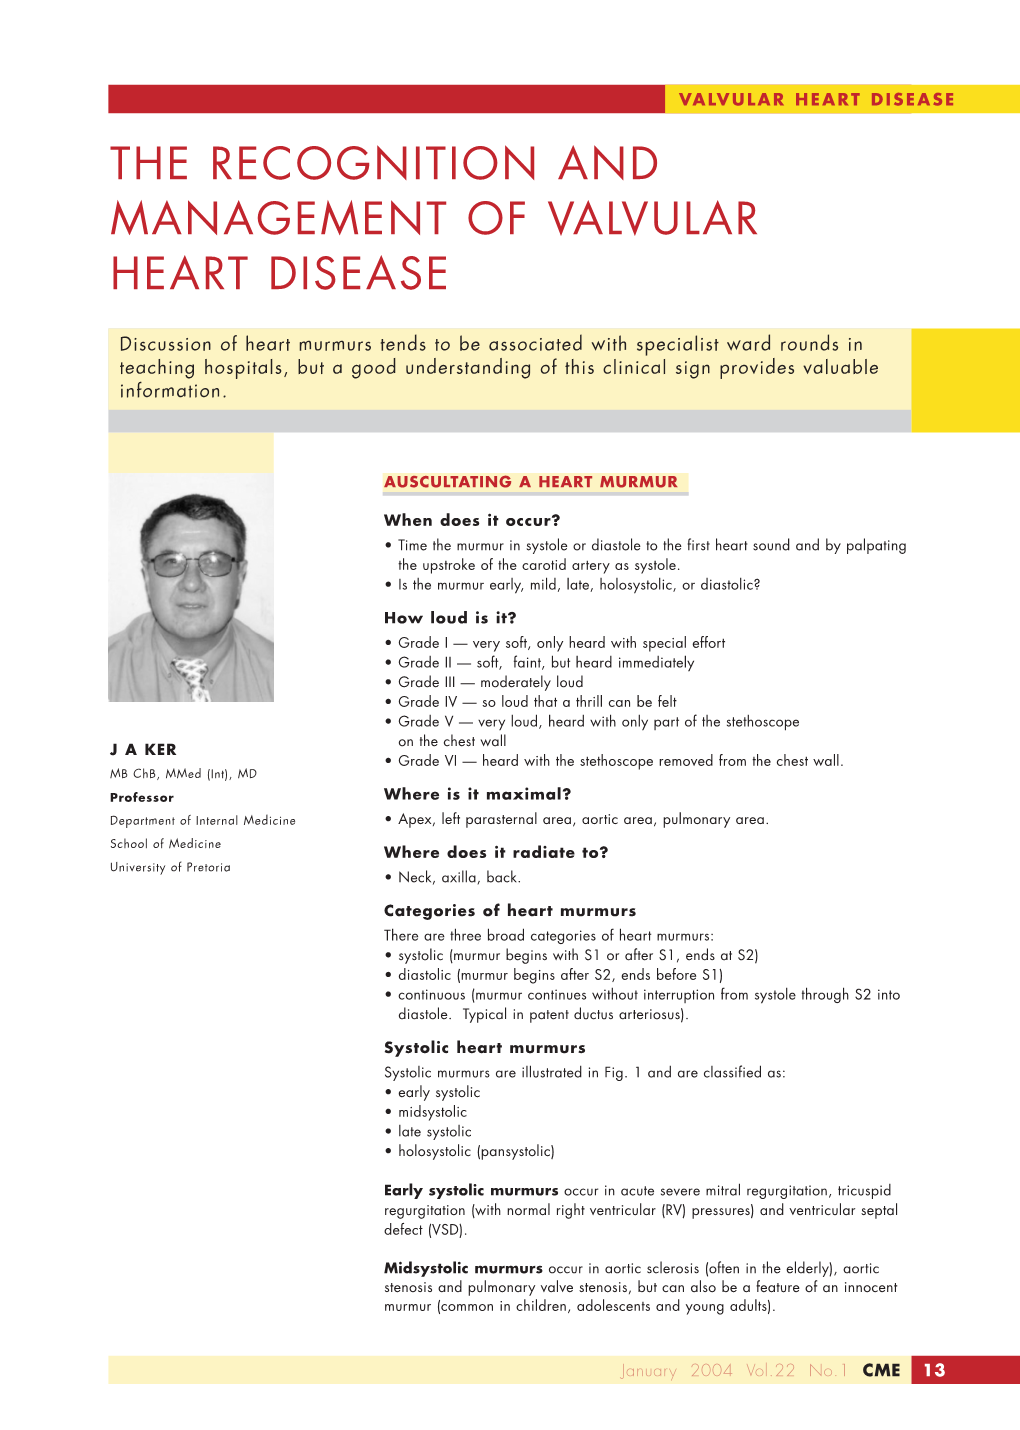 The Recognition and Management of Valvular Heart Disease